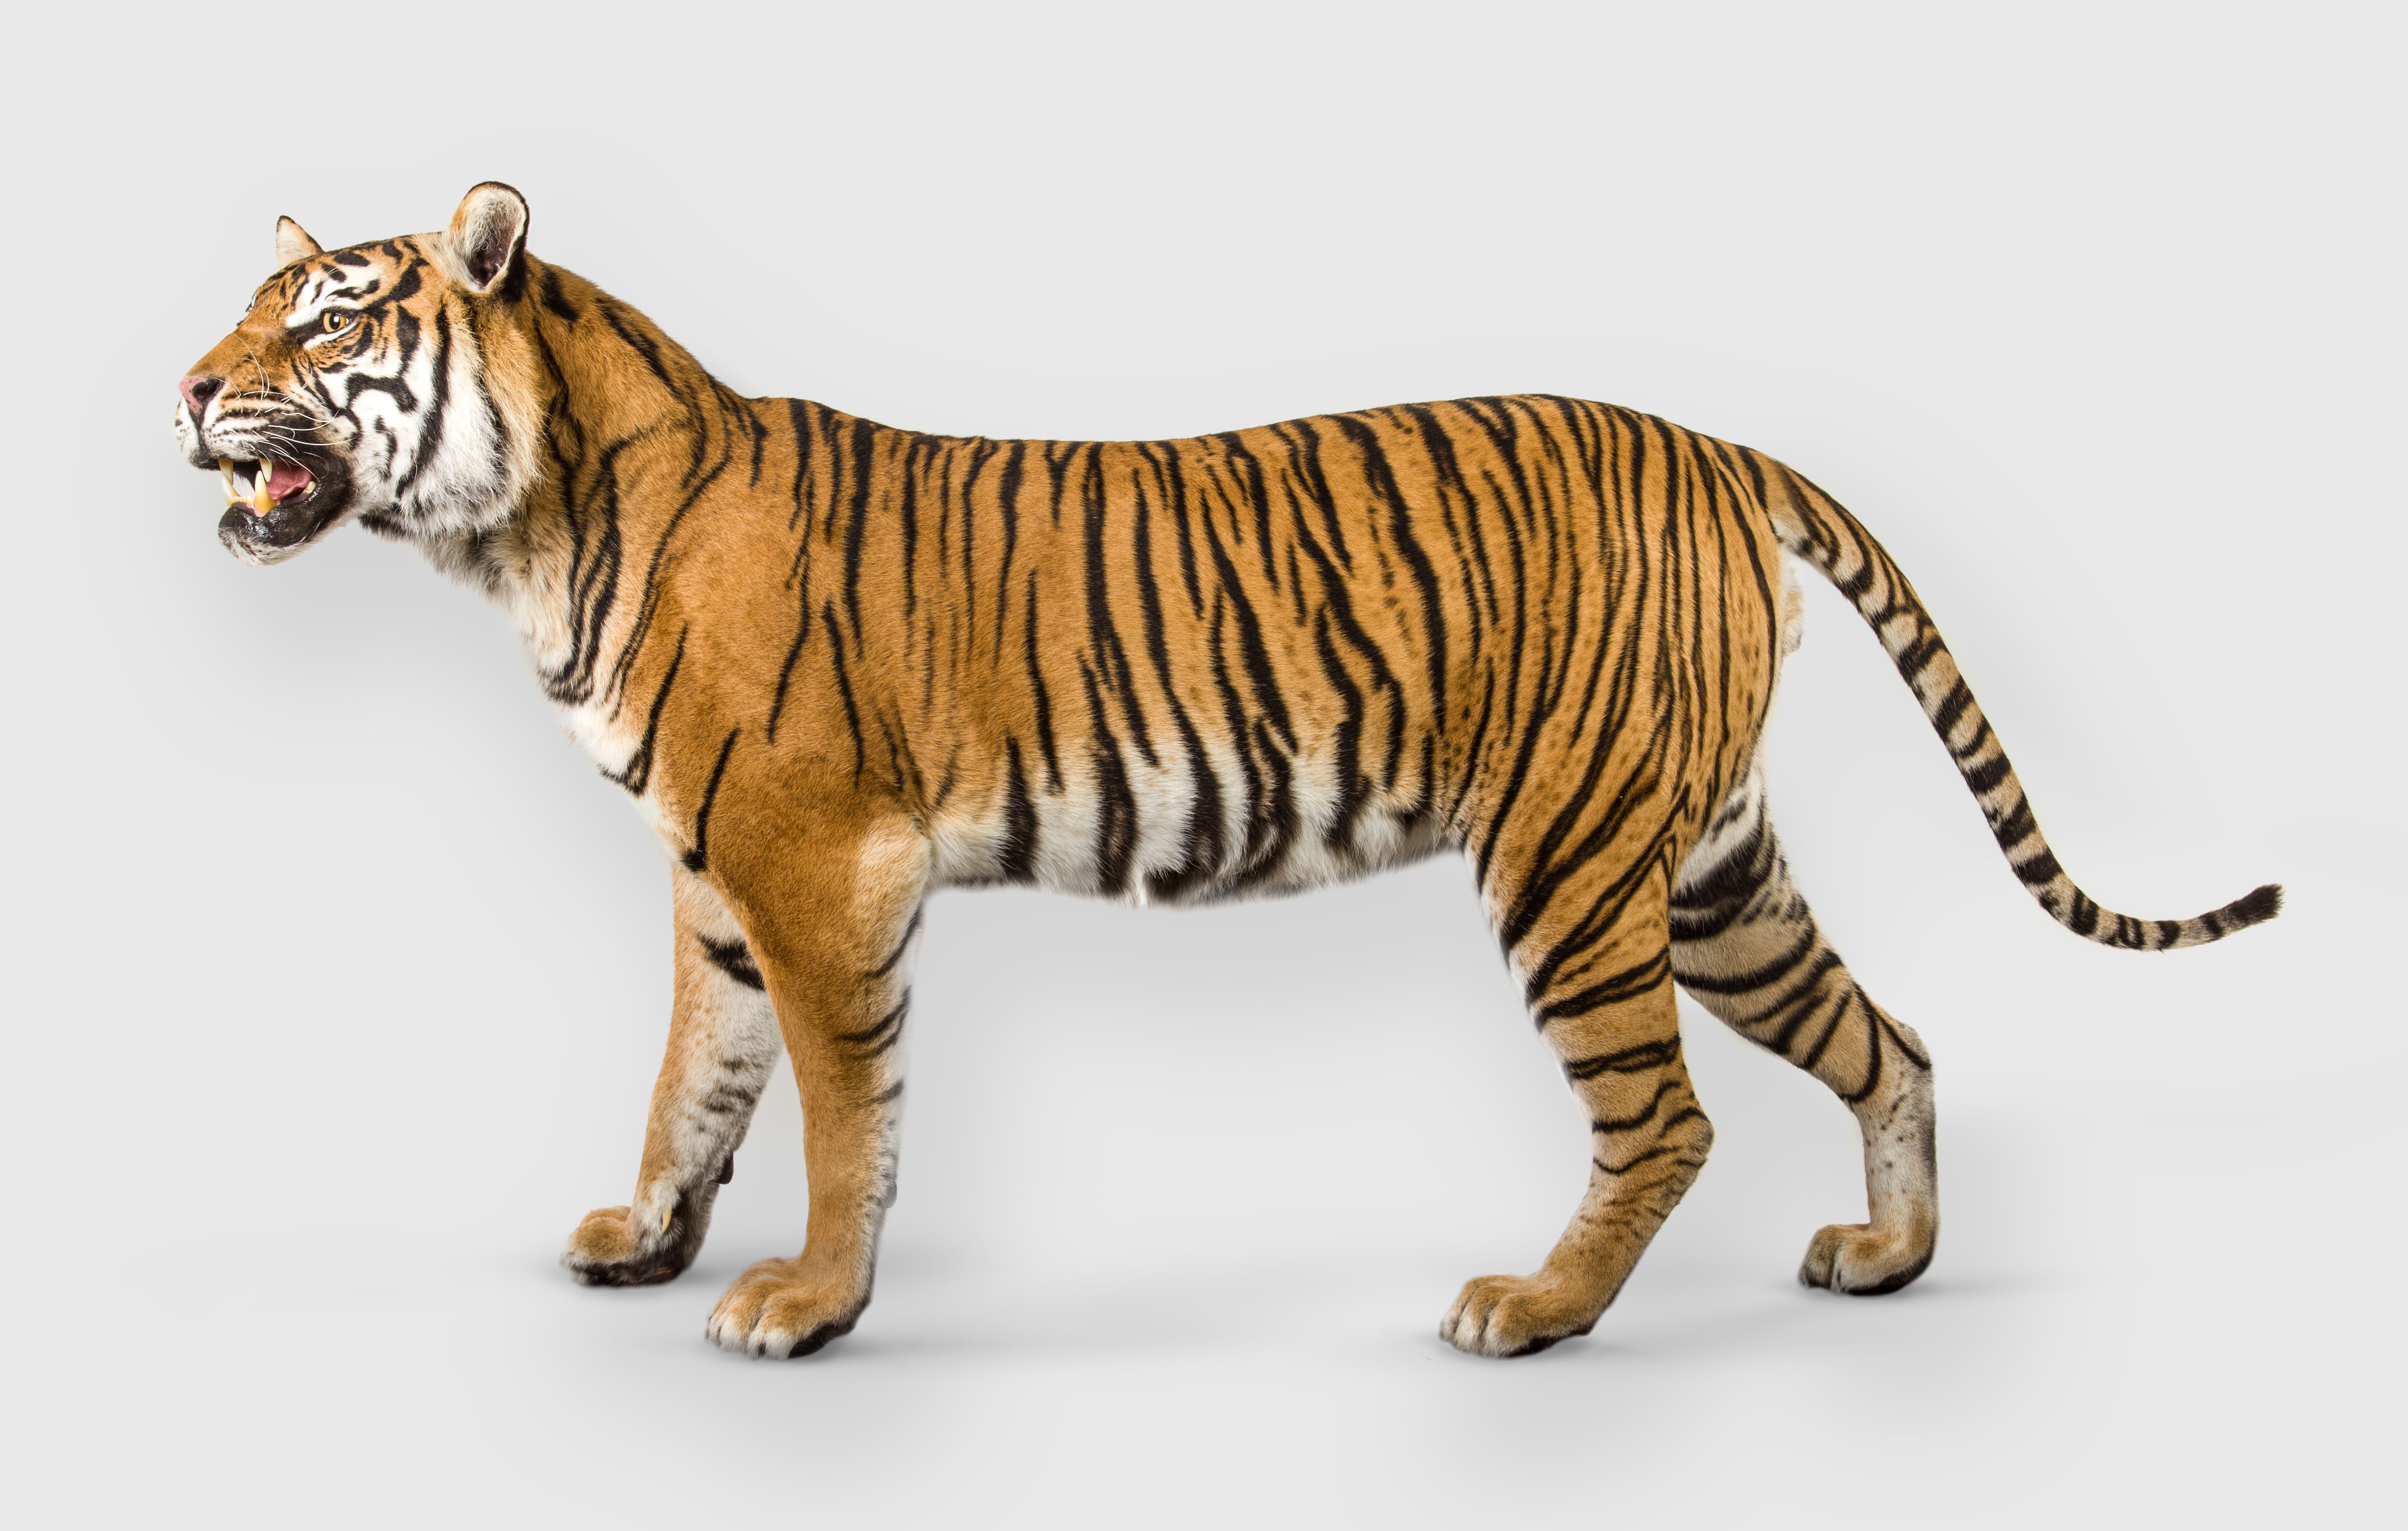 Photograph of Bryn, a Sumatran Tiger specimen which is part of the natural history collection at National Museum Cardiff